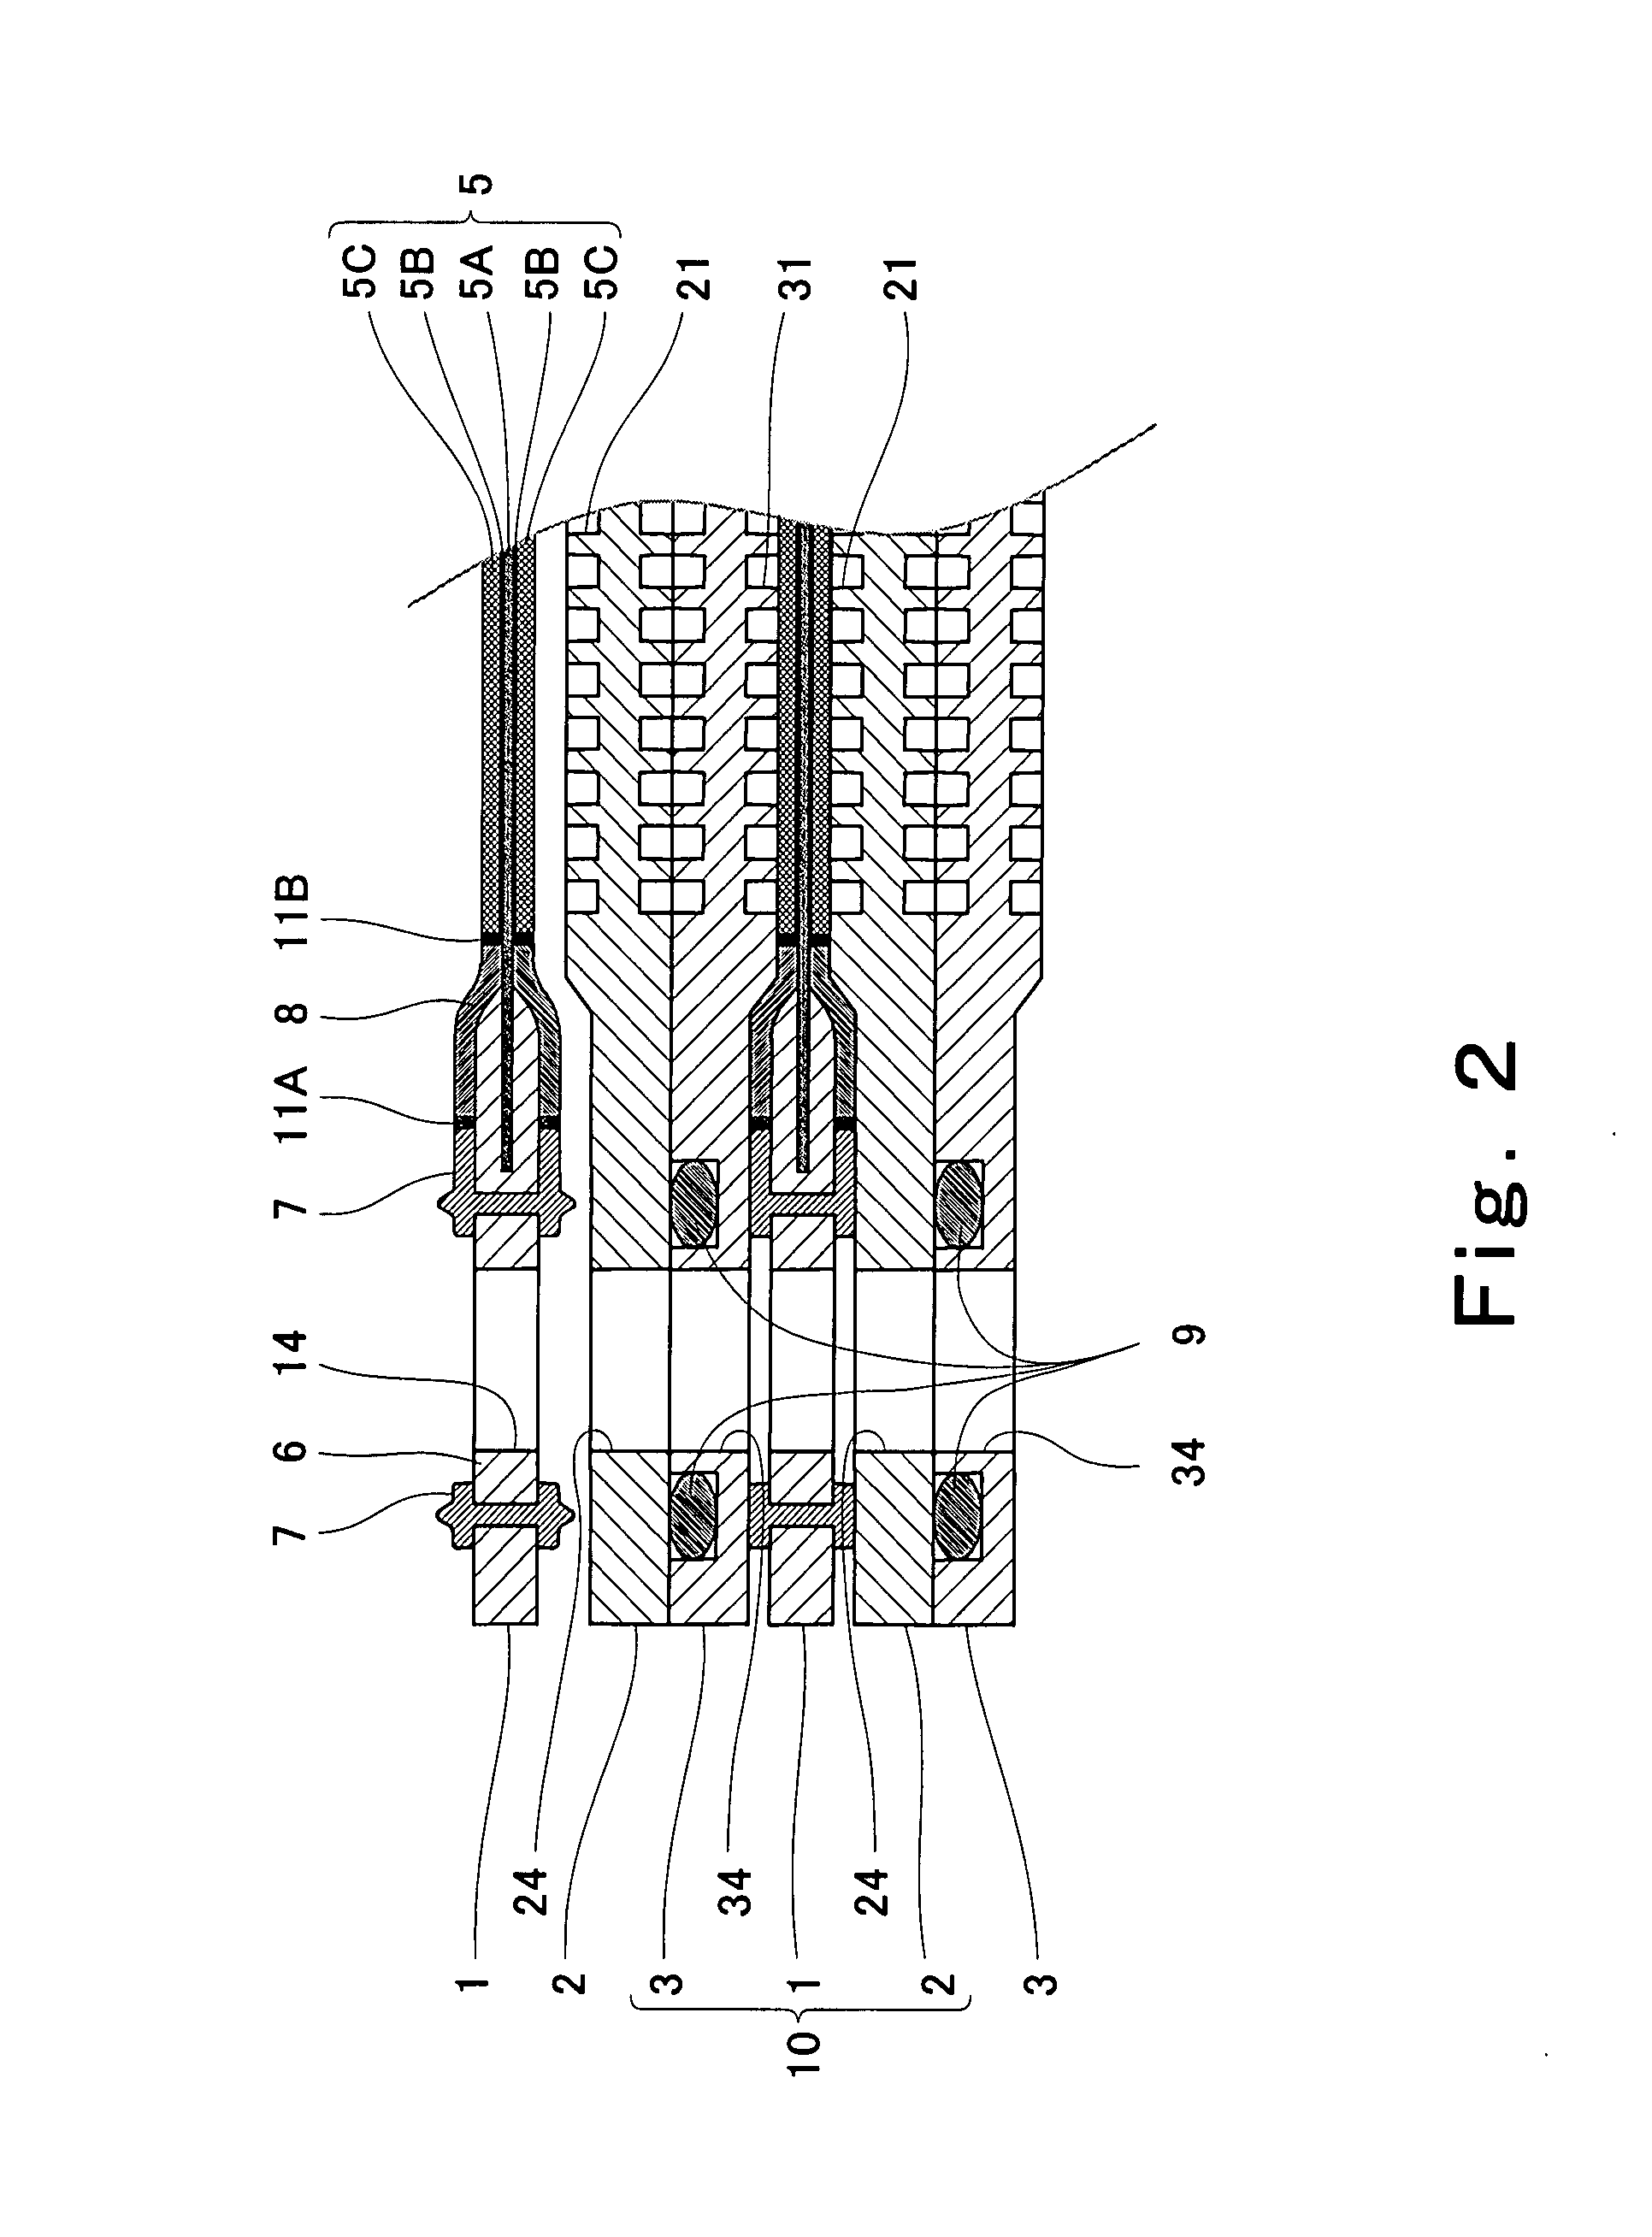 Mea-Gasket Assembly and Polymer Electrolyte Fuel Cell Using Same